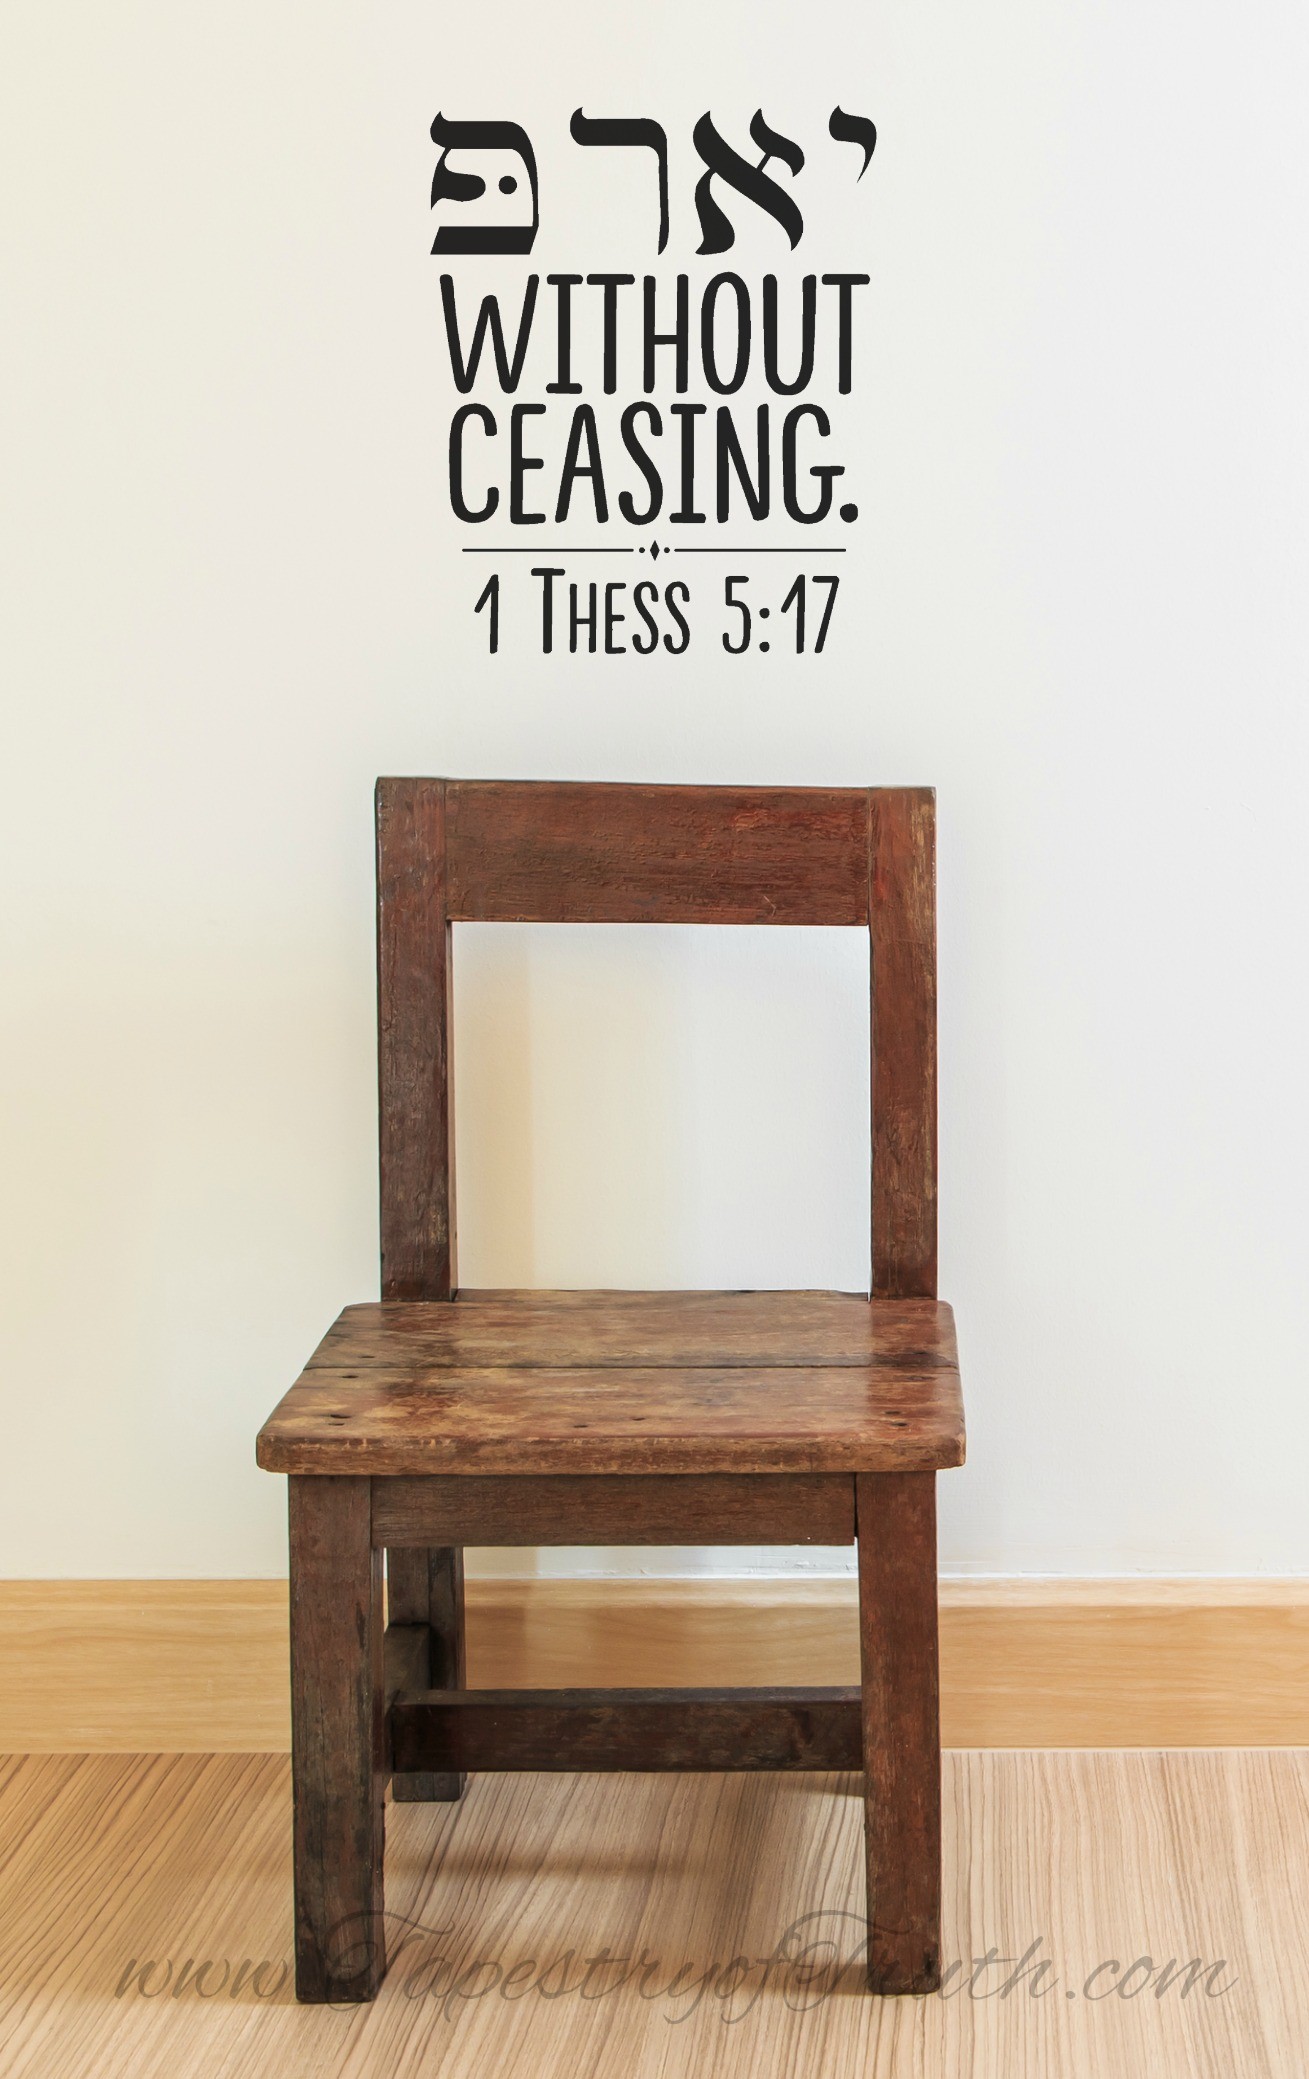 Pray without ceasing. 1 Thess. 5:17 Hebrew - Decal 1